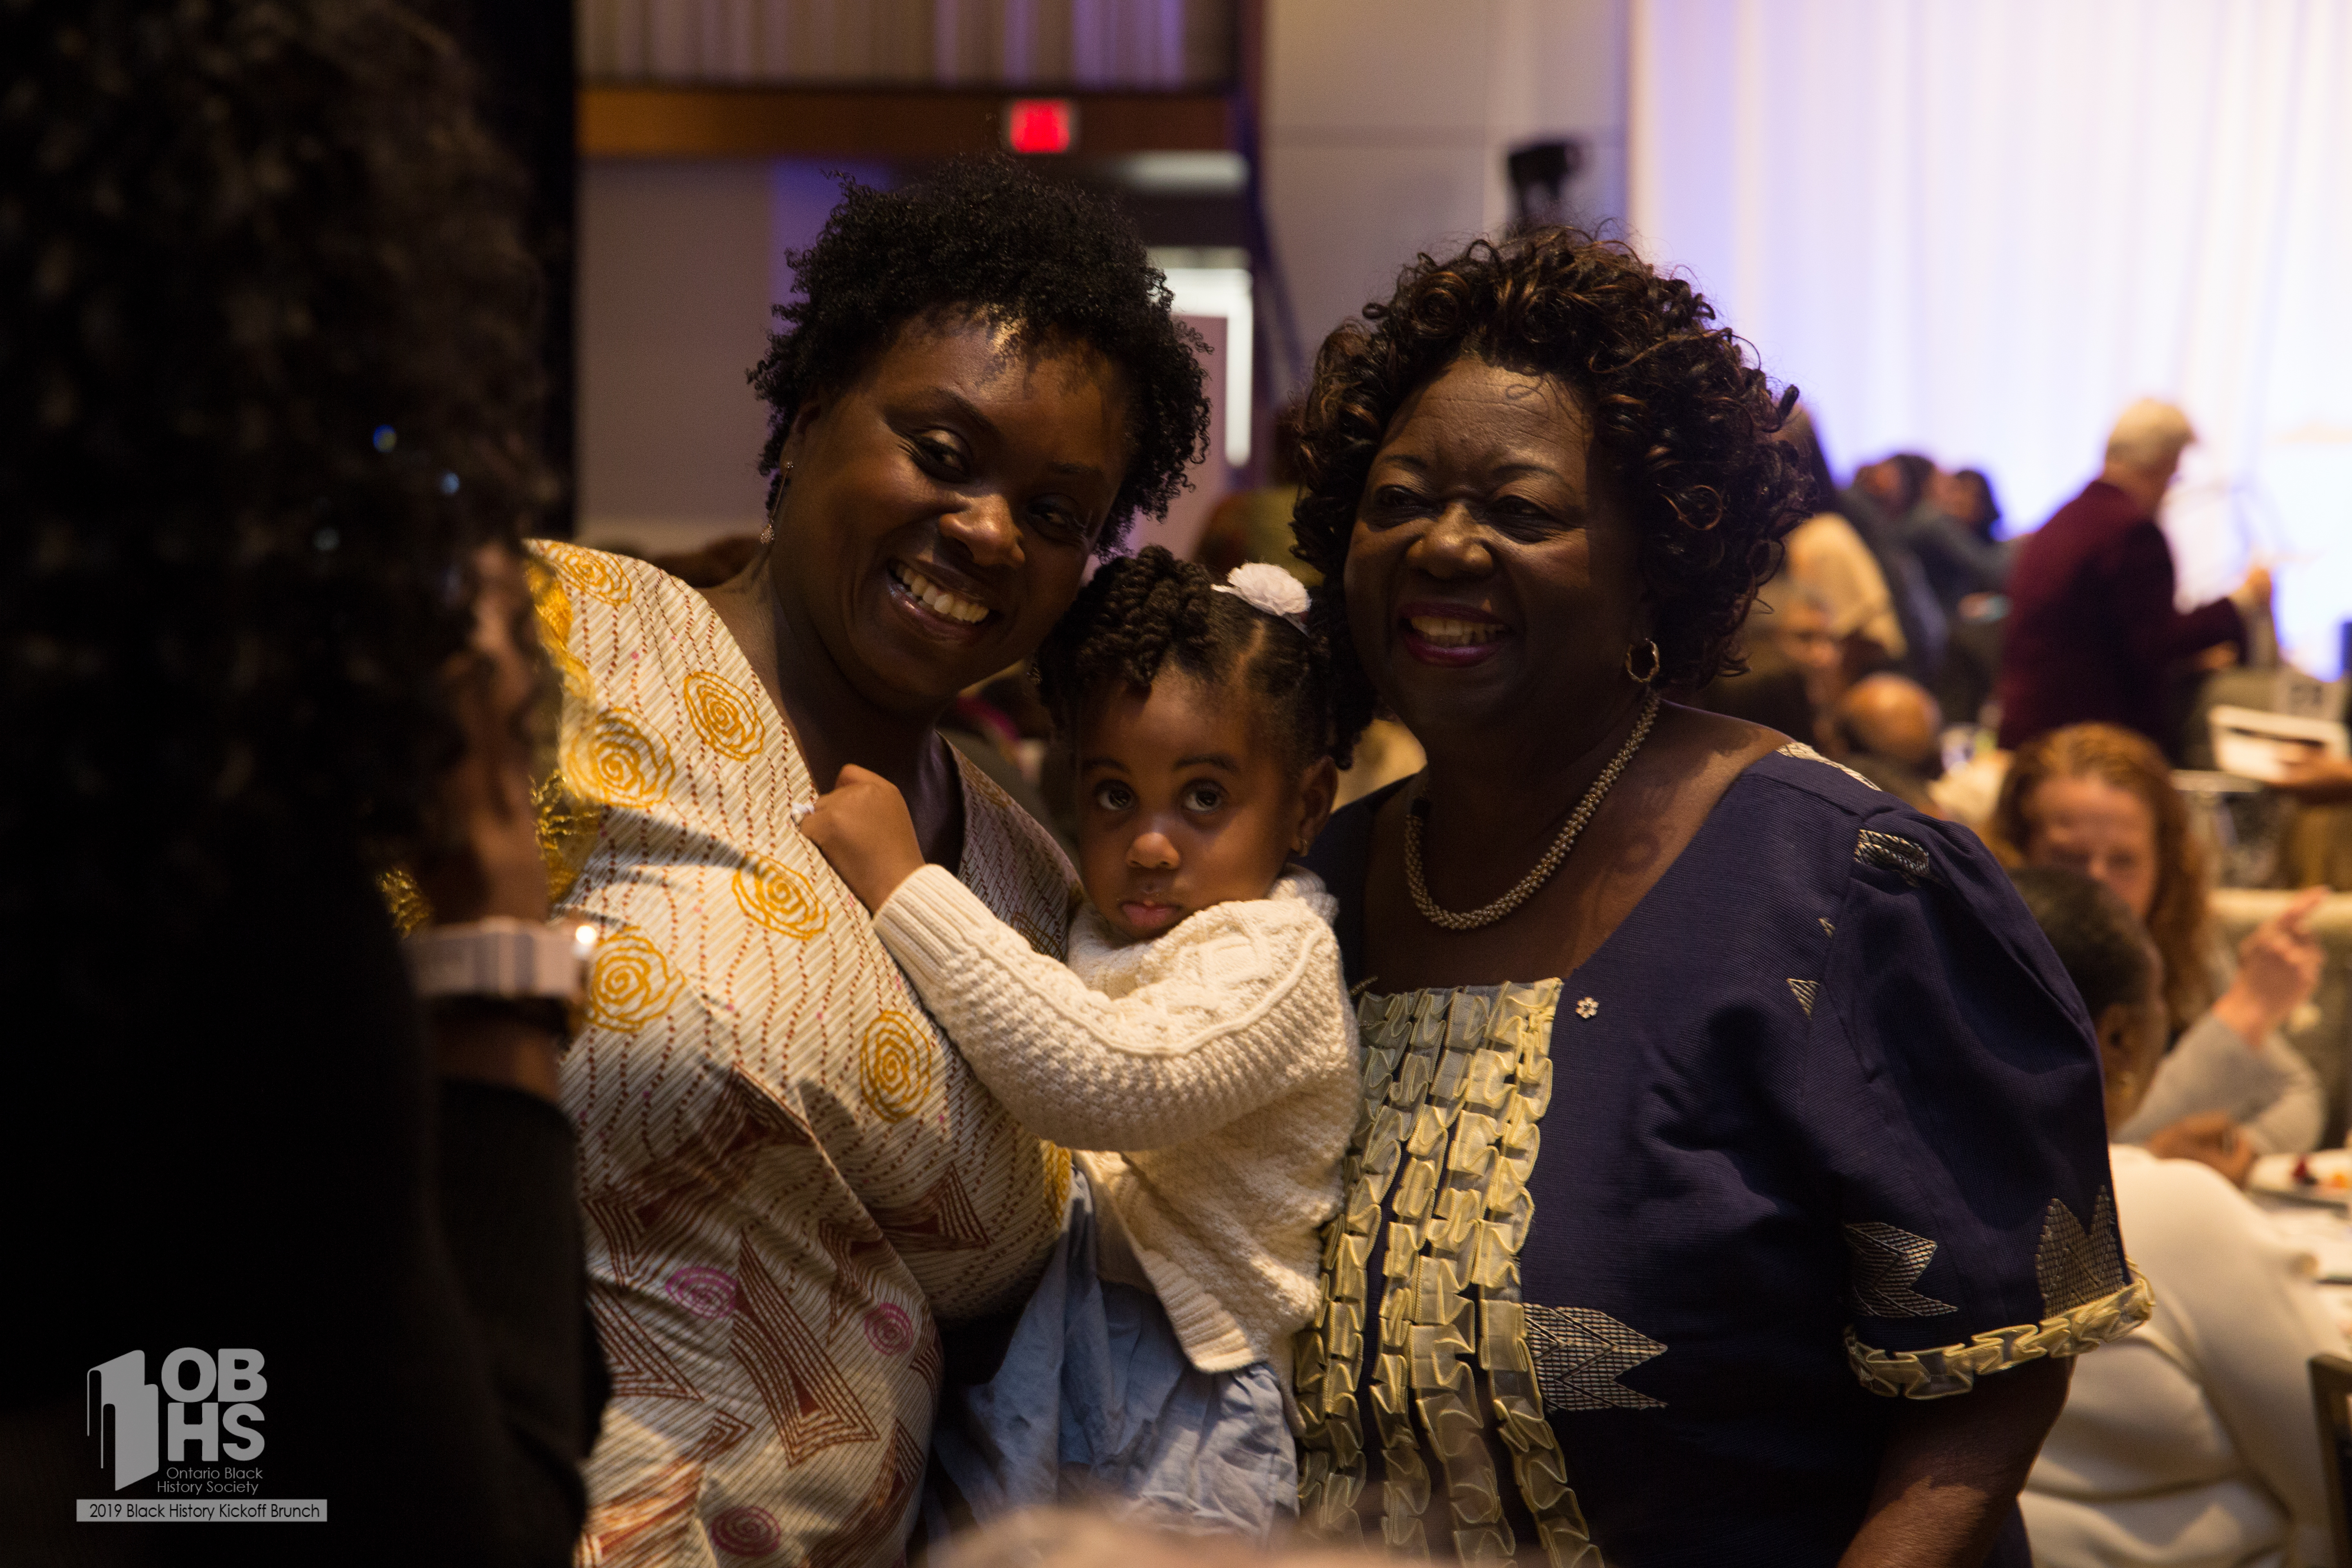 Hon. Jean Augustine (R) with Felicia and daughter - photo by www.sayhilondon.com